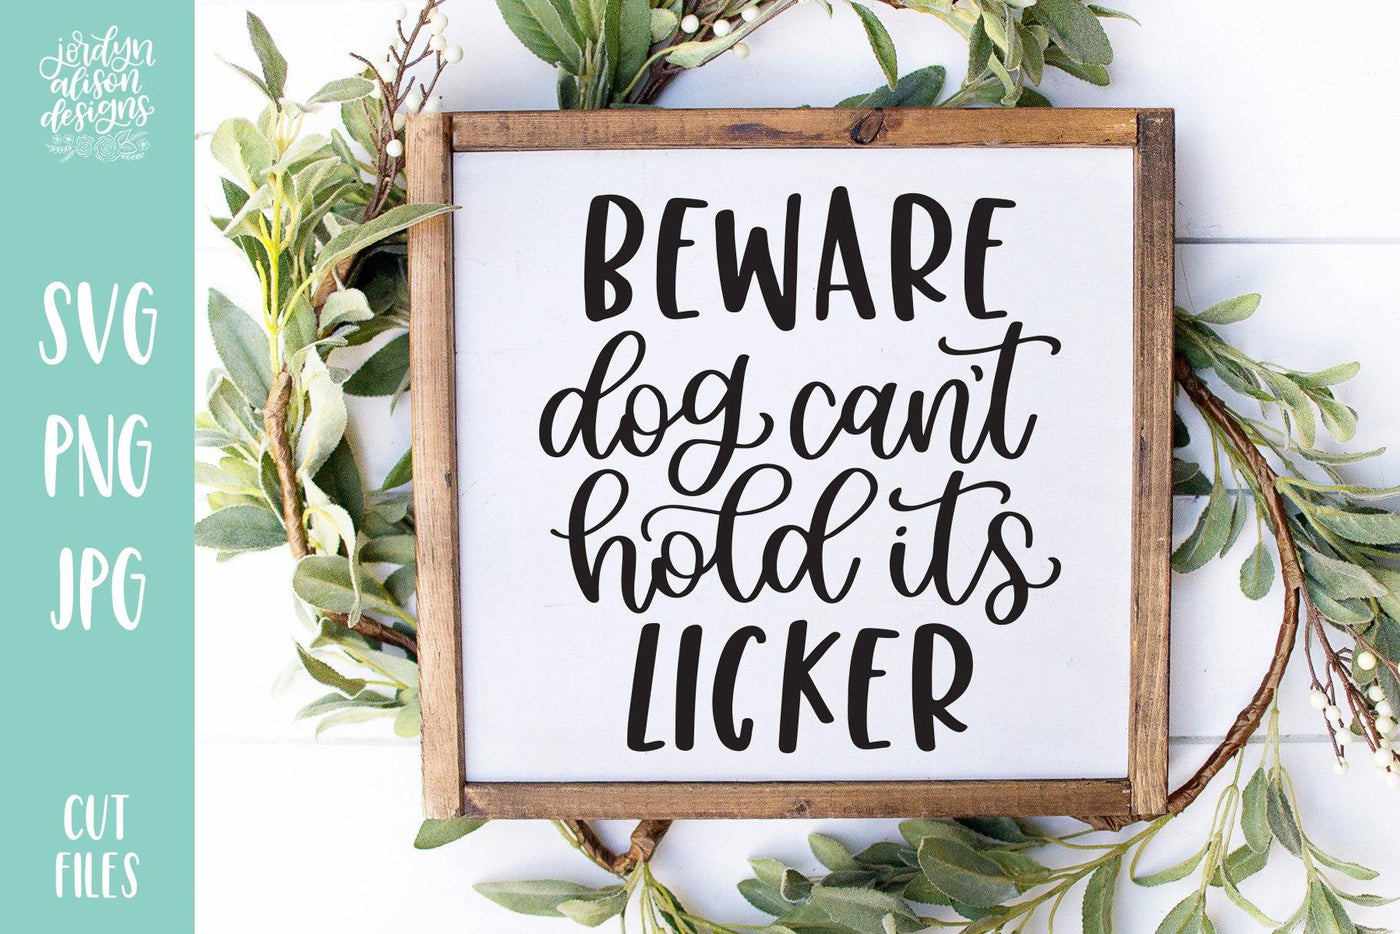 Cut File | Dog Can't Hold Its Licker - JordynAlisonDesigns